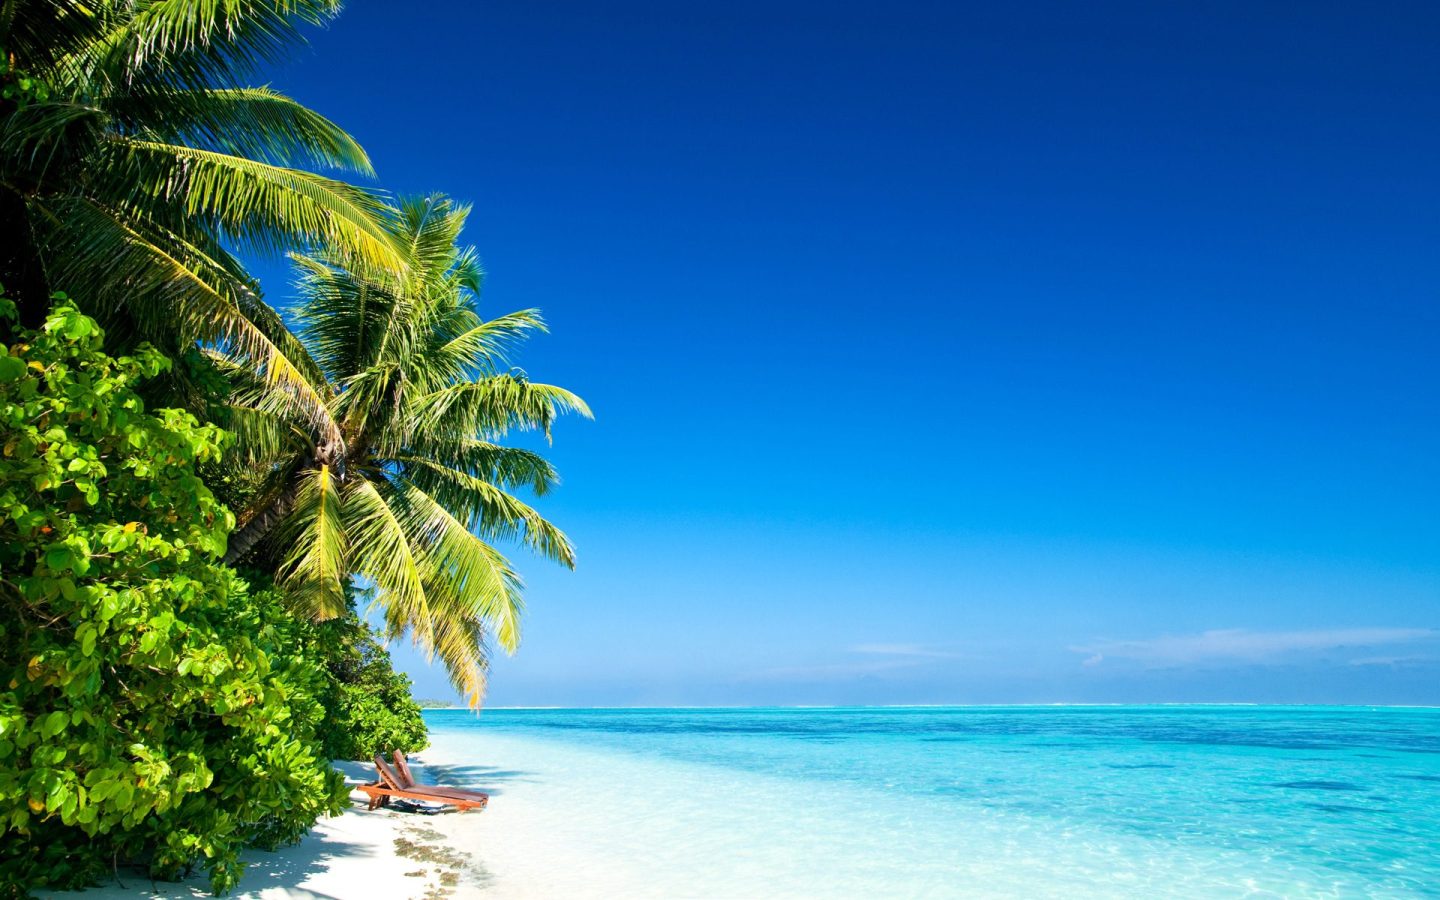 Free download Beach Desktop Backgrounds for Windows 7 4 [1440x900] for